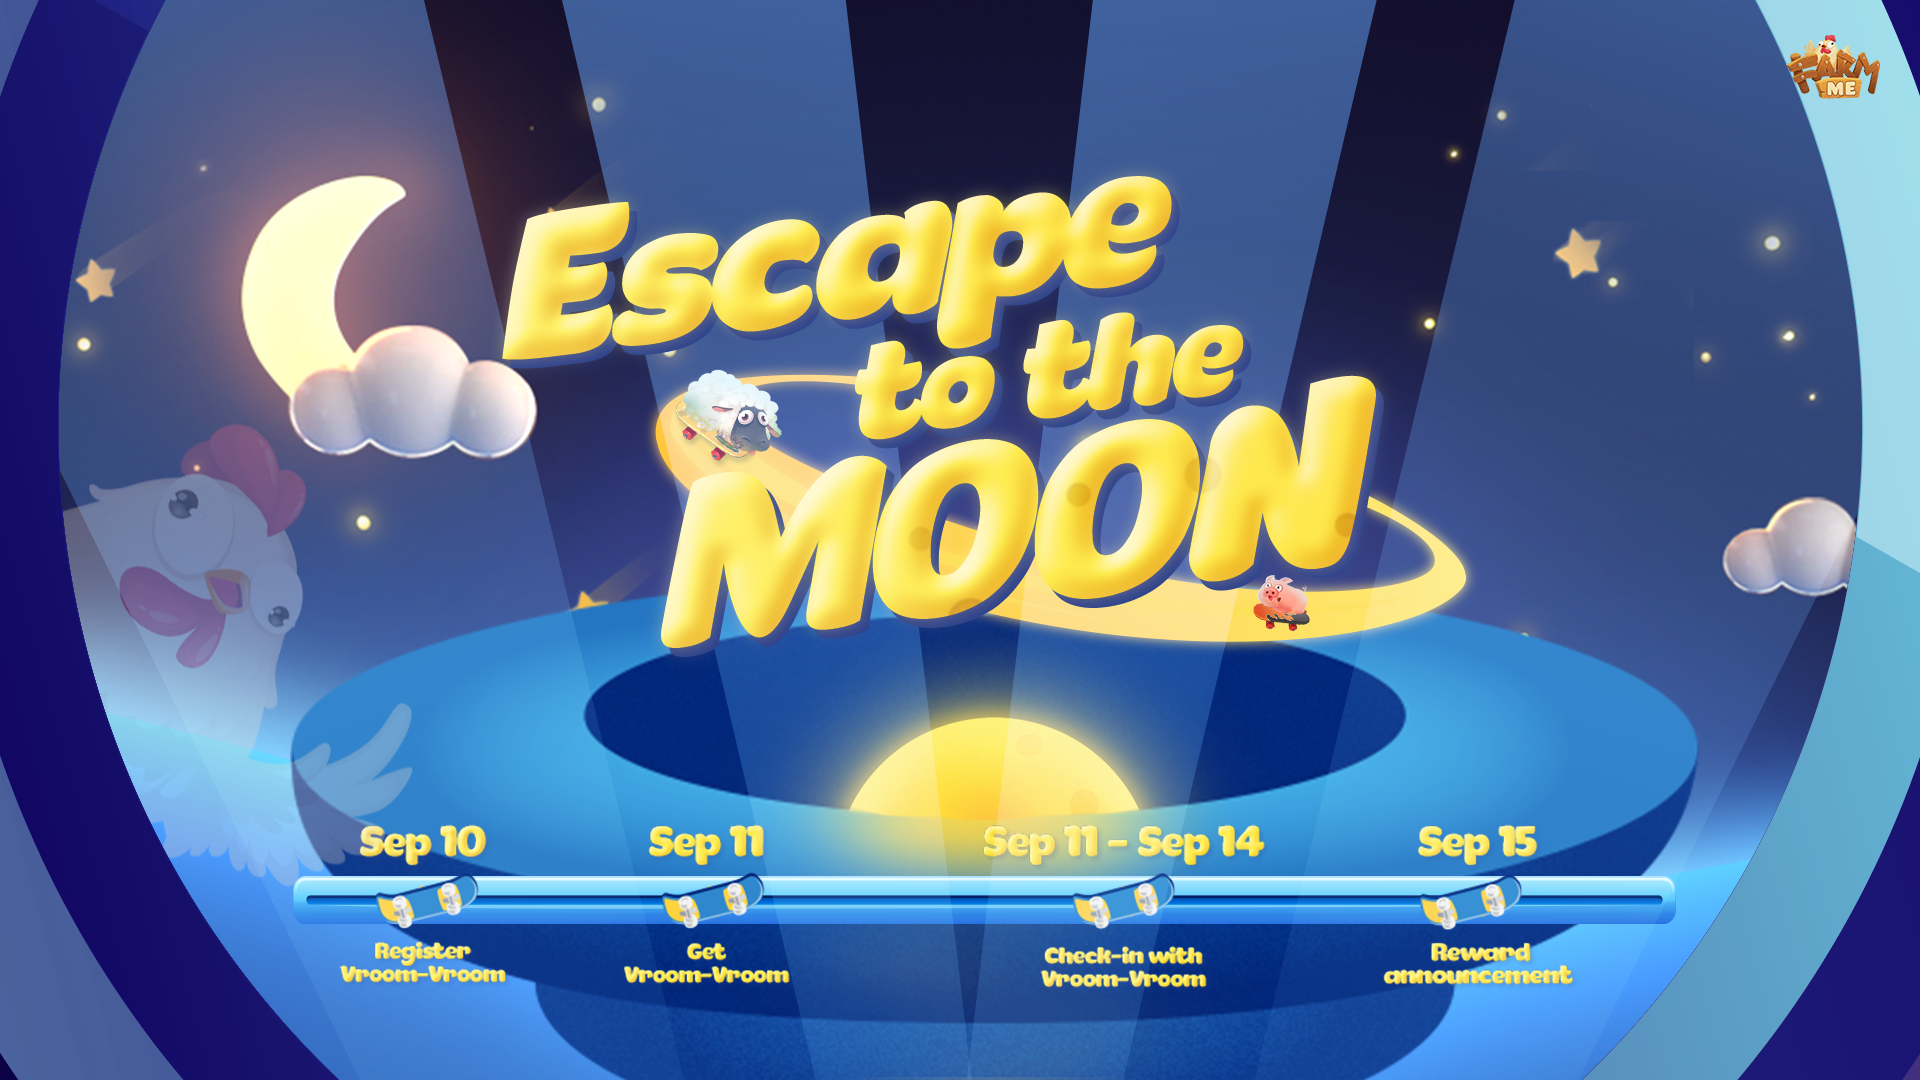 Escape to the Moon - Mid-Autumn Event Series